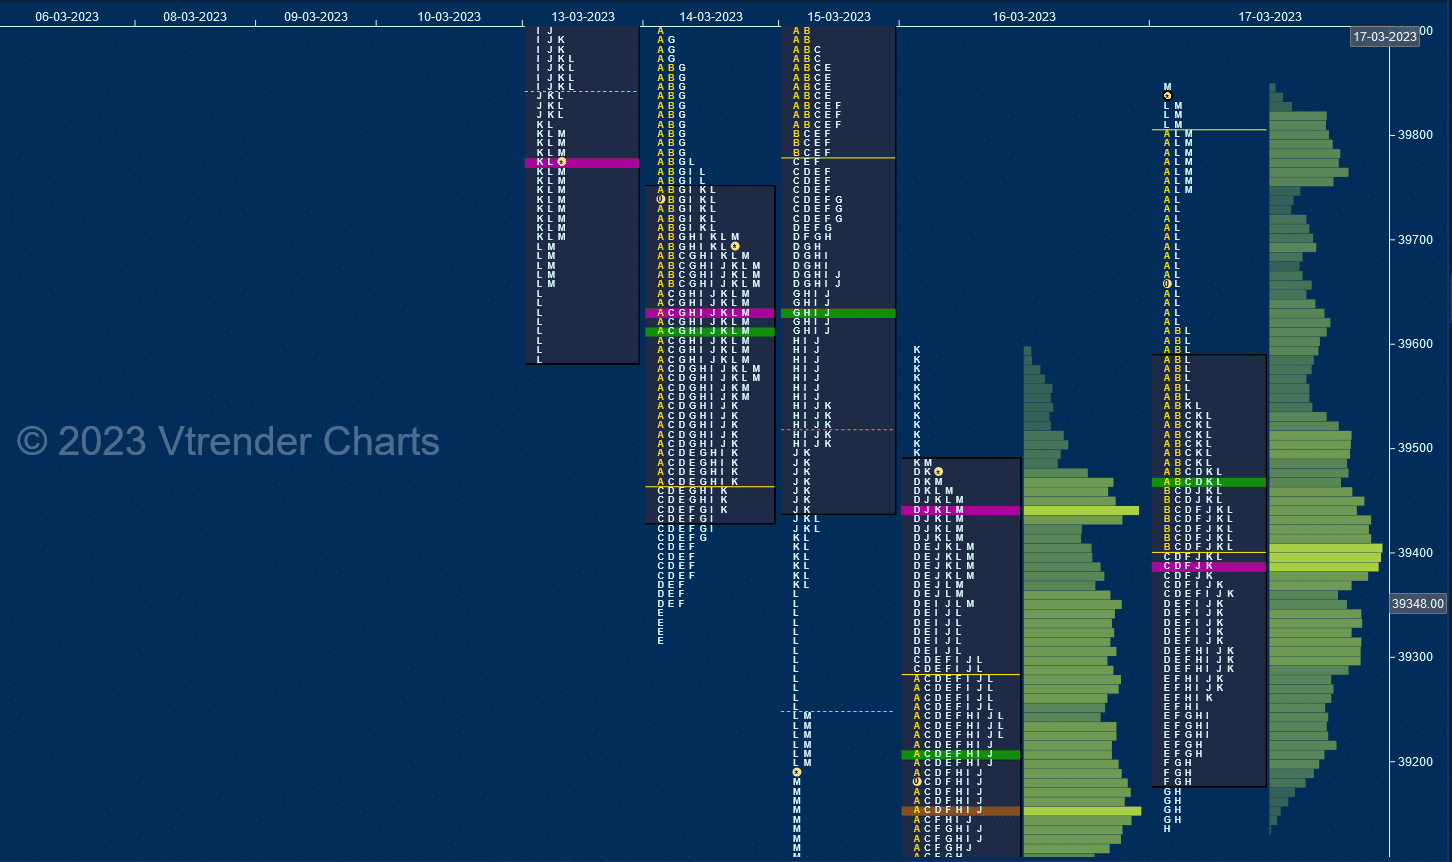 Bnf 11 Market Profile Analysis Dated 17Th Mar 2023 Banknifty Futures, Charts, Day Trading, Intraday Trading, Intraday Trading Strategies, Market Profile, Market Profile Trading Strategies, Nifty Futures, Order Flow Analysis, Support And Resistance, Technical Analysis, Trading Strategies, Volume Profile Trading